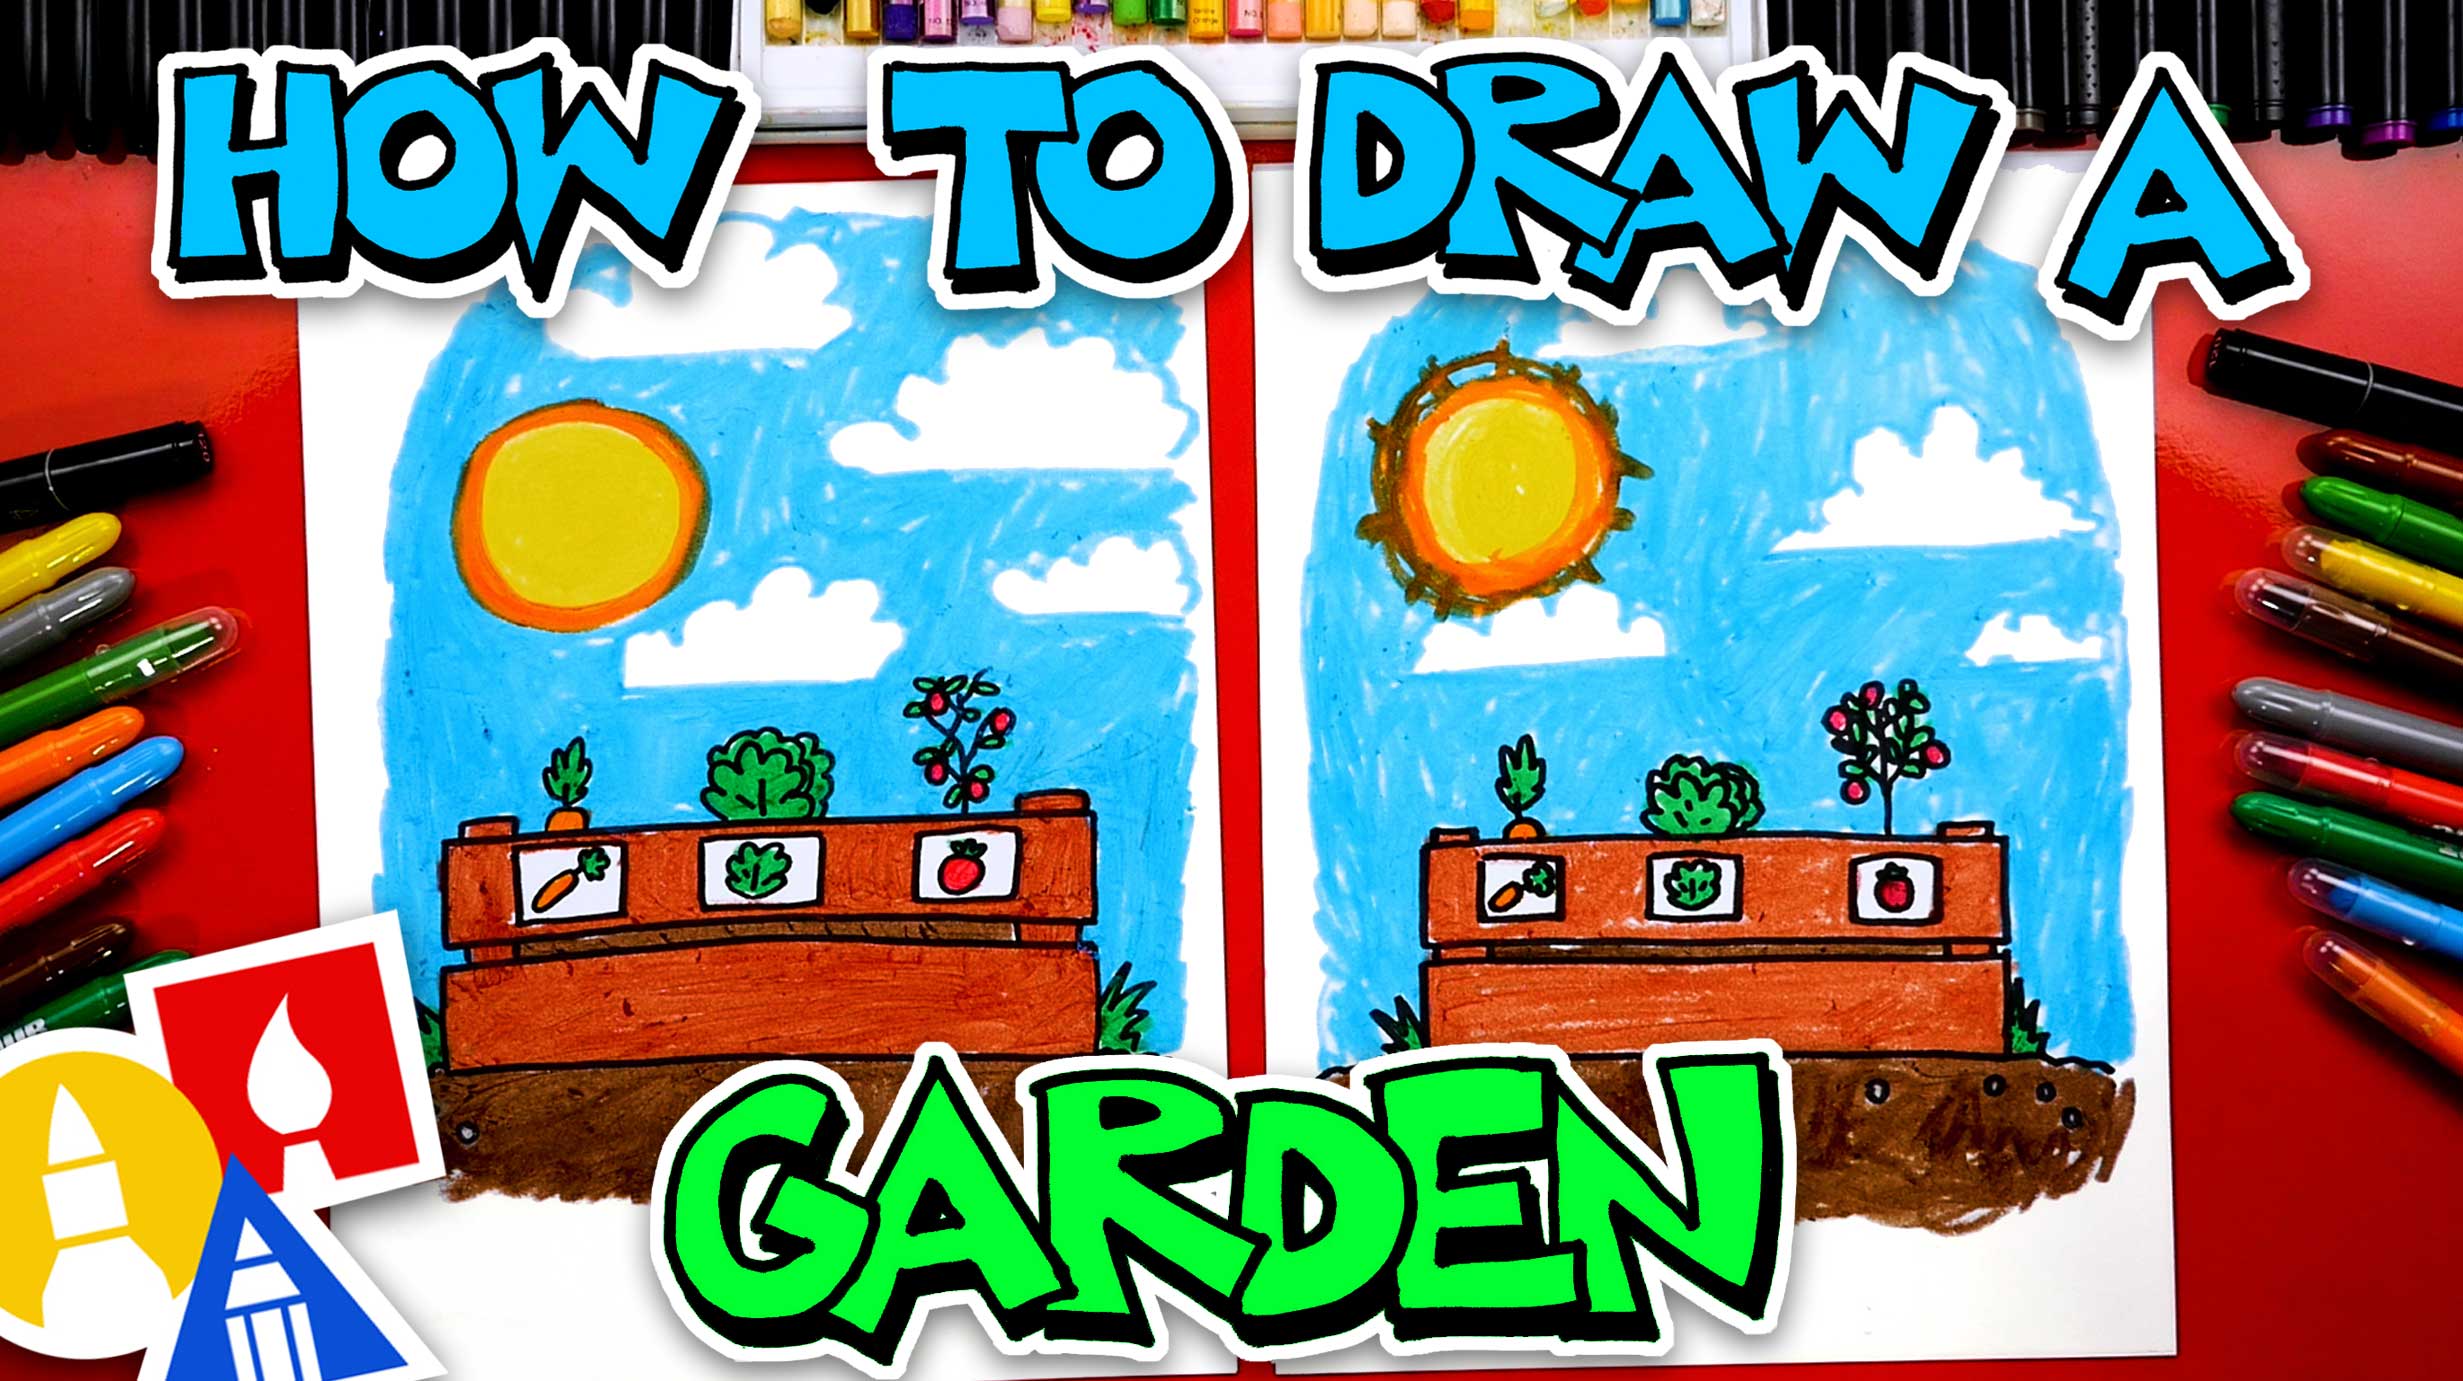 How To Draw A Garden Art For Kids Hub